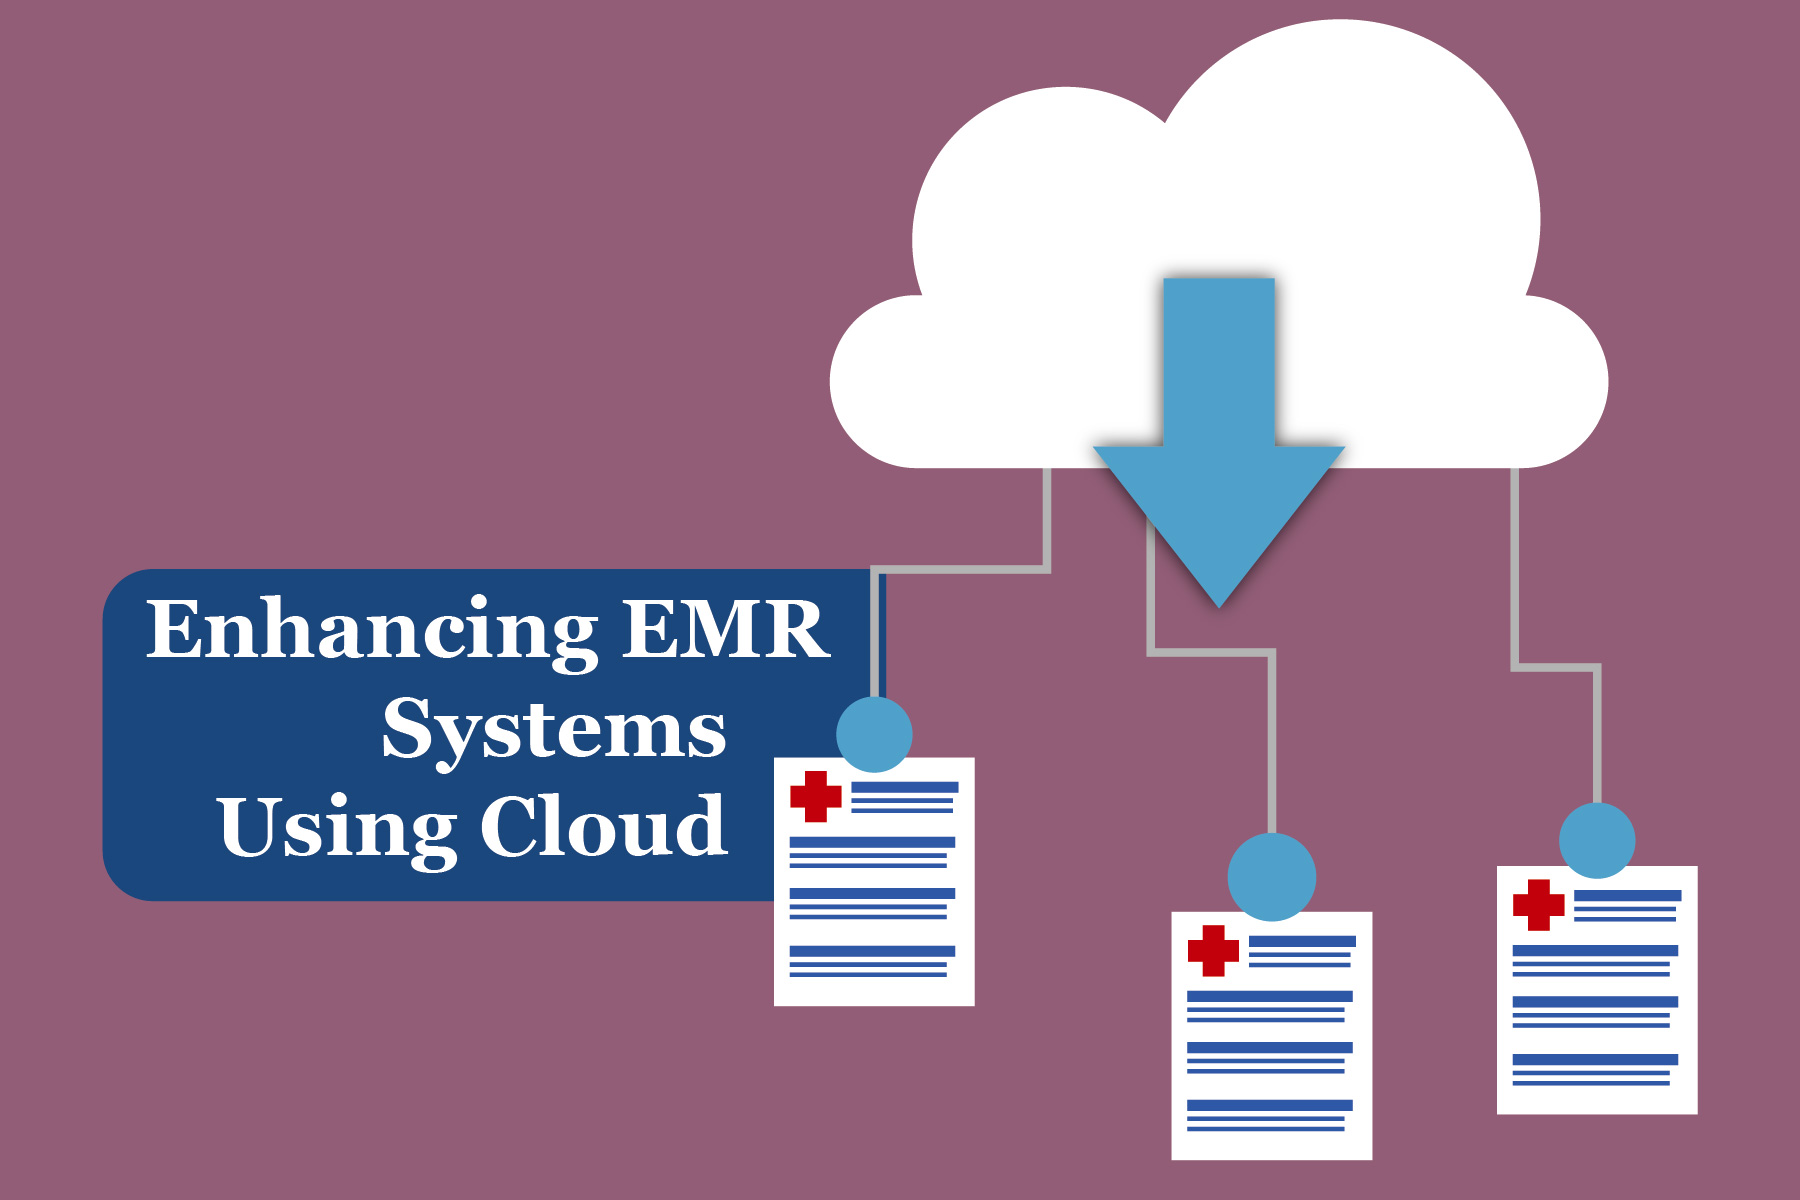 Enhancing EMR Systems Using Cloud